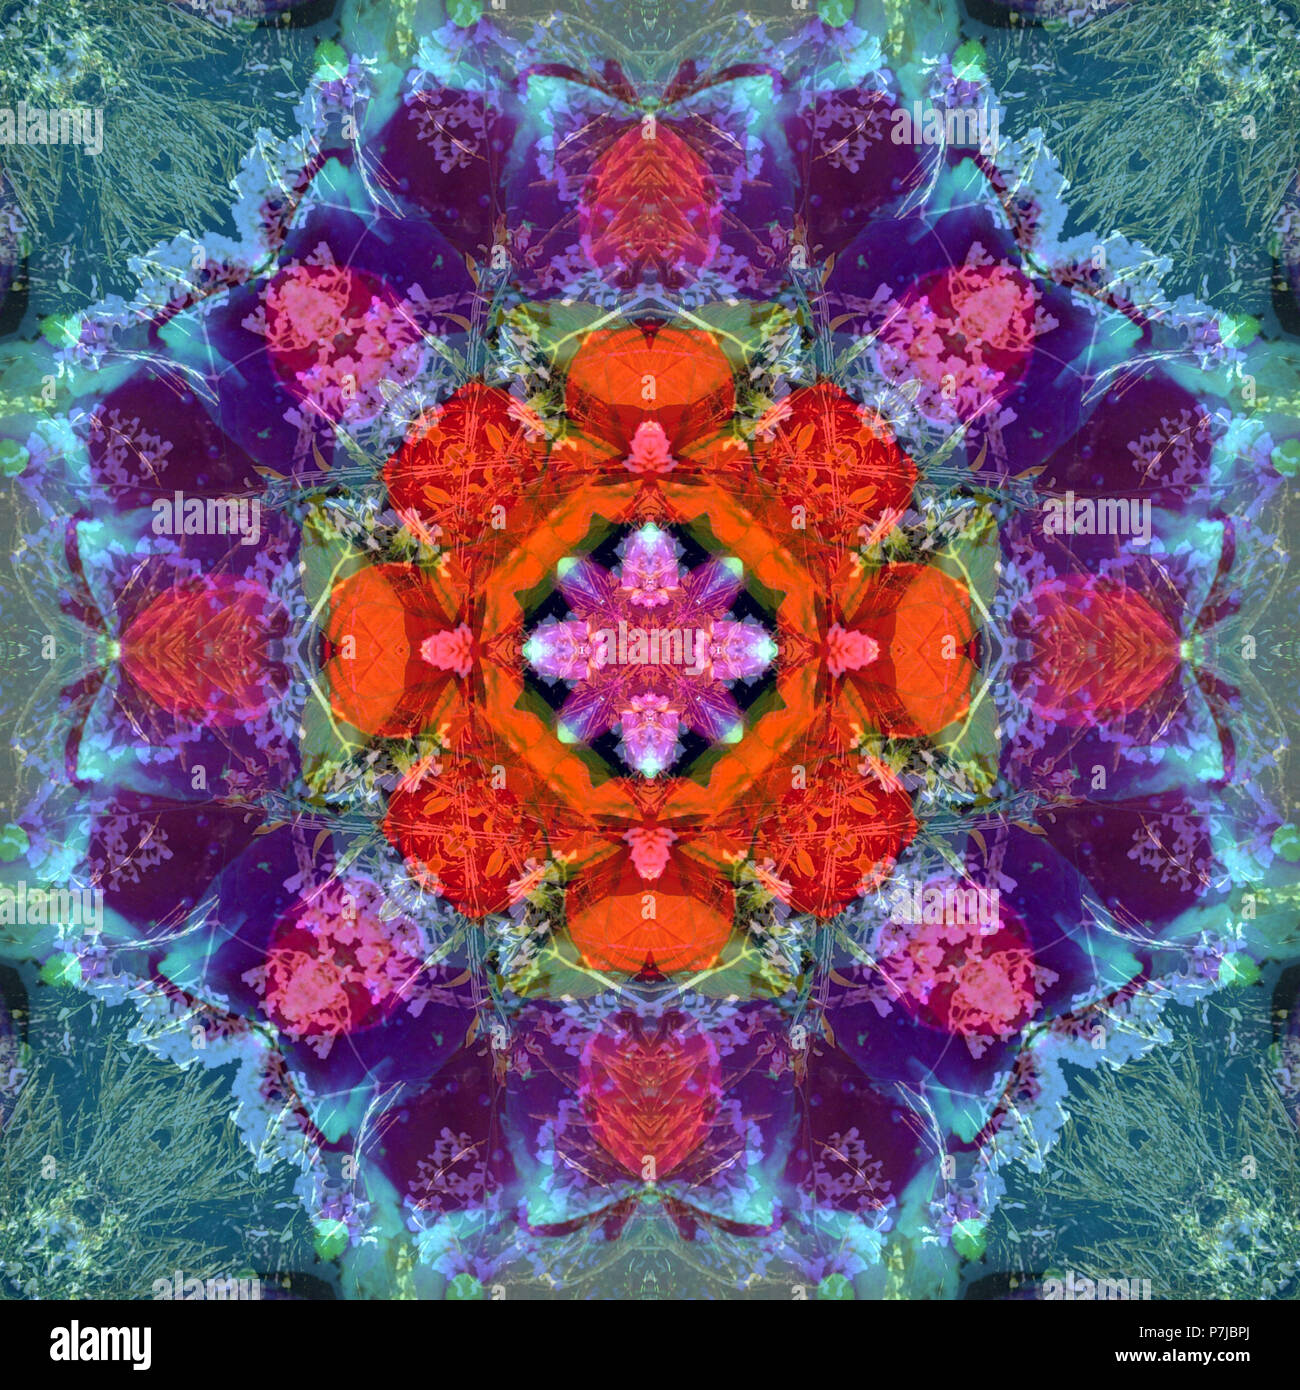 Composing of flowers in a mandala ornament Stock Photo